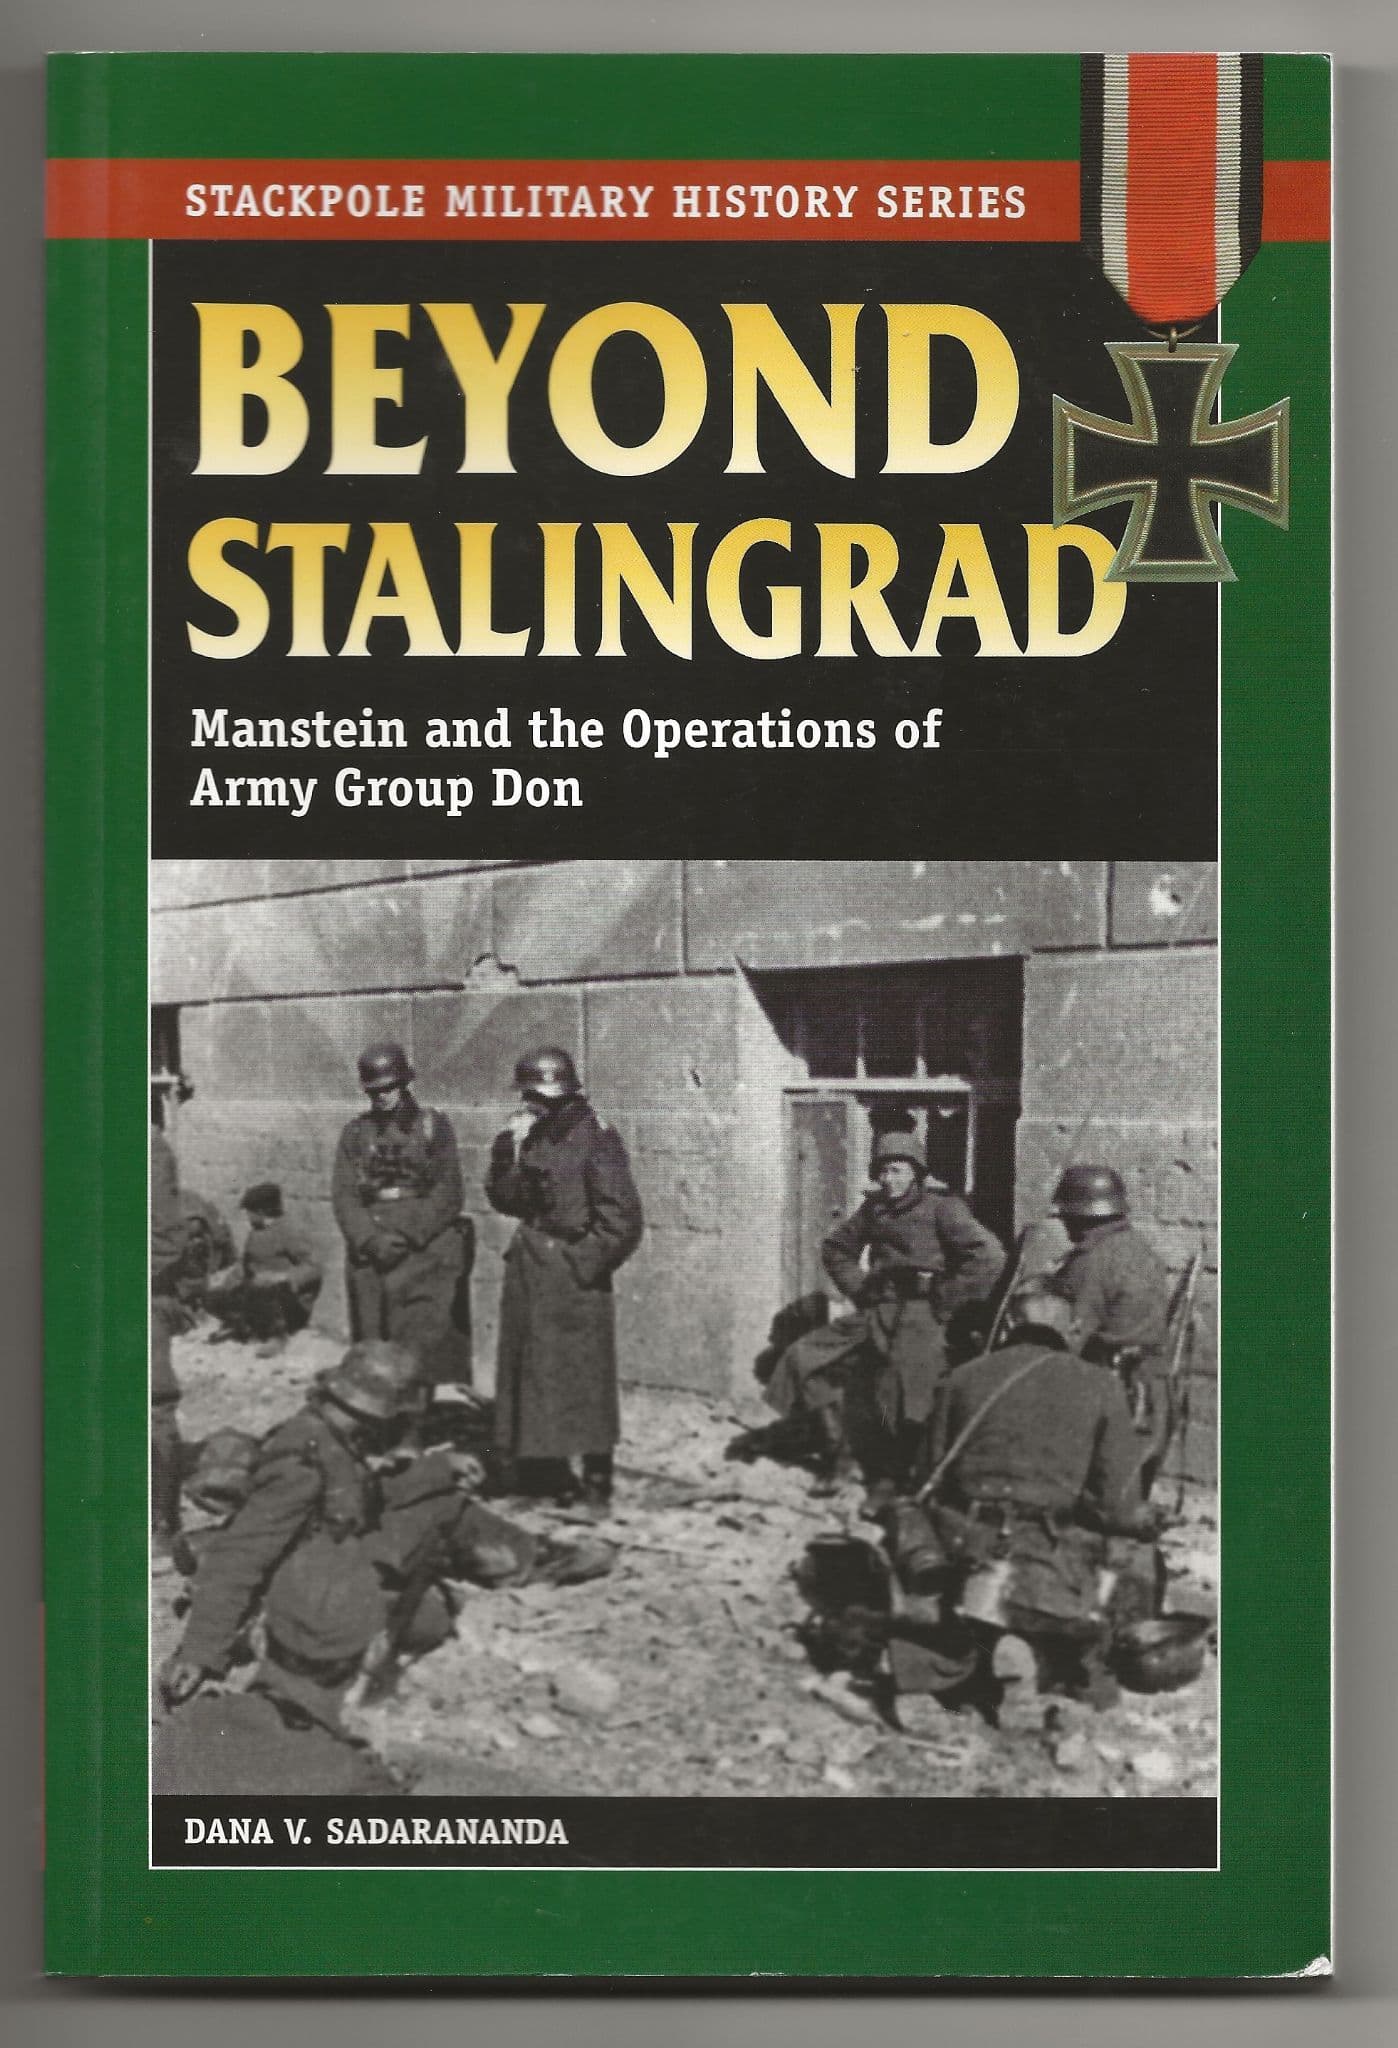 Stackpole: Beyond Stalingrad, Mainstein and the Operations of Army Group Don